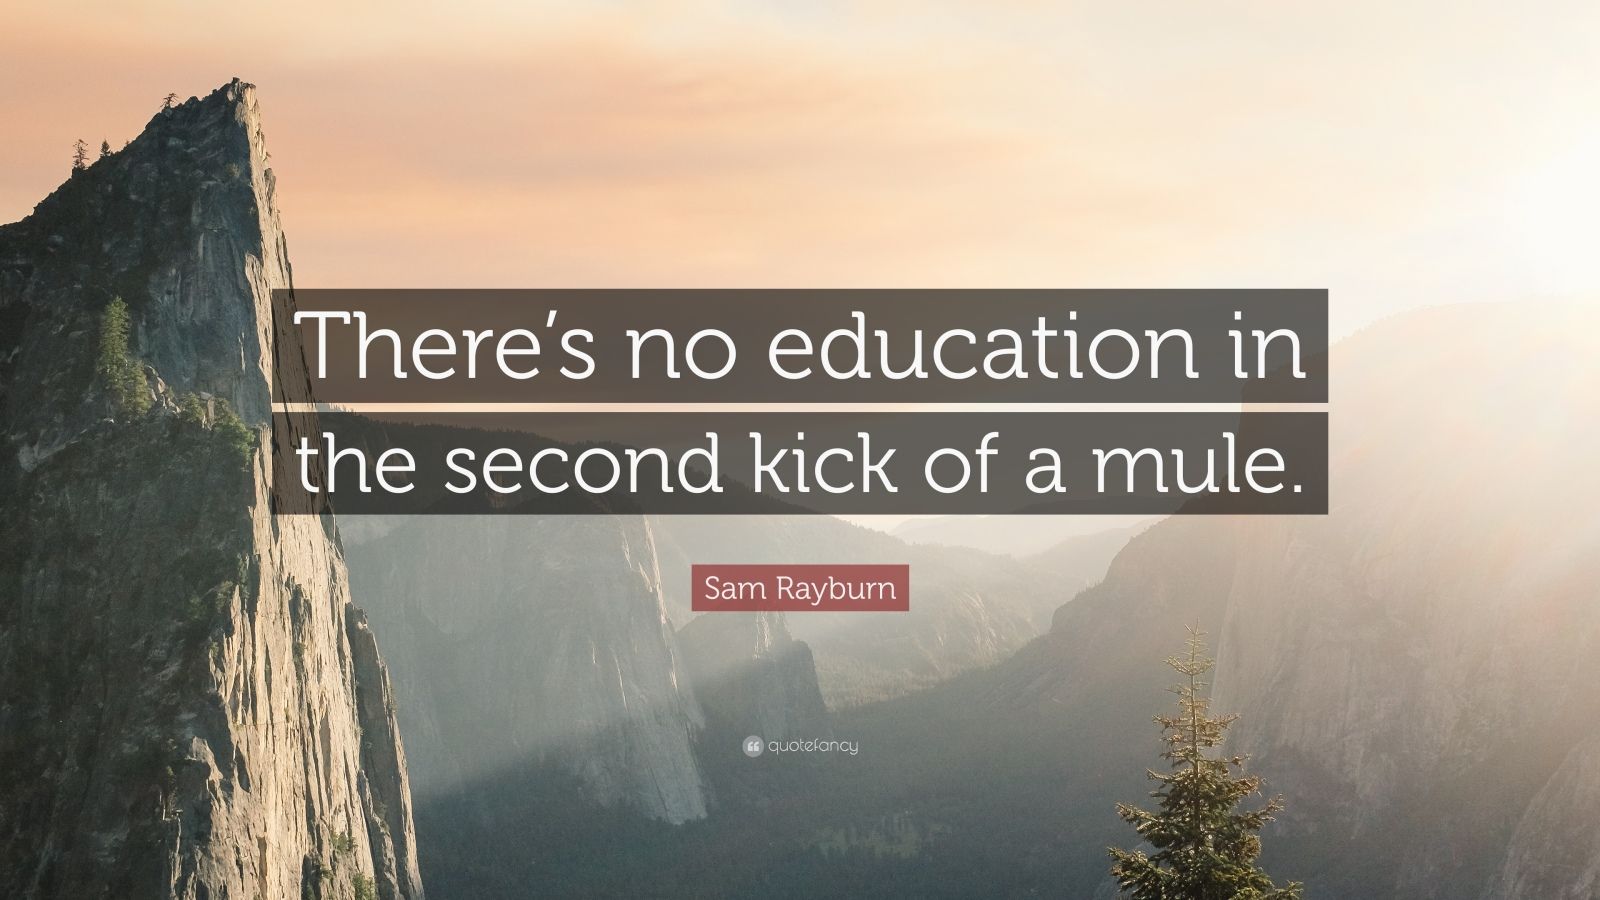 Sam Rayburn Quotes (20 wallpapers) - Quotefancy